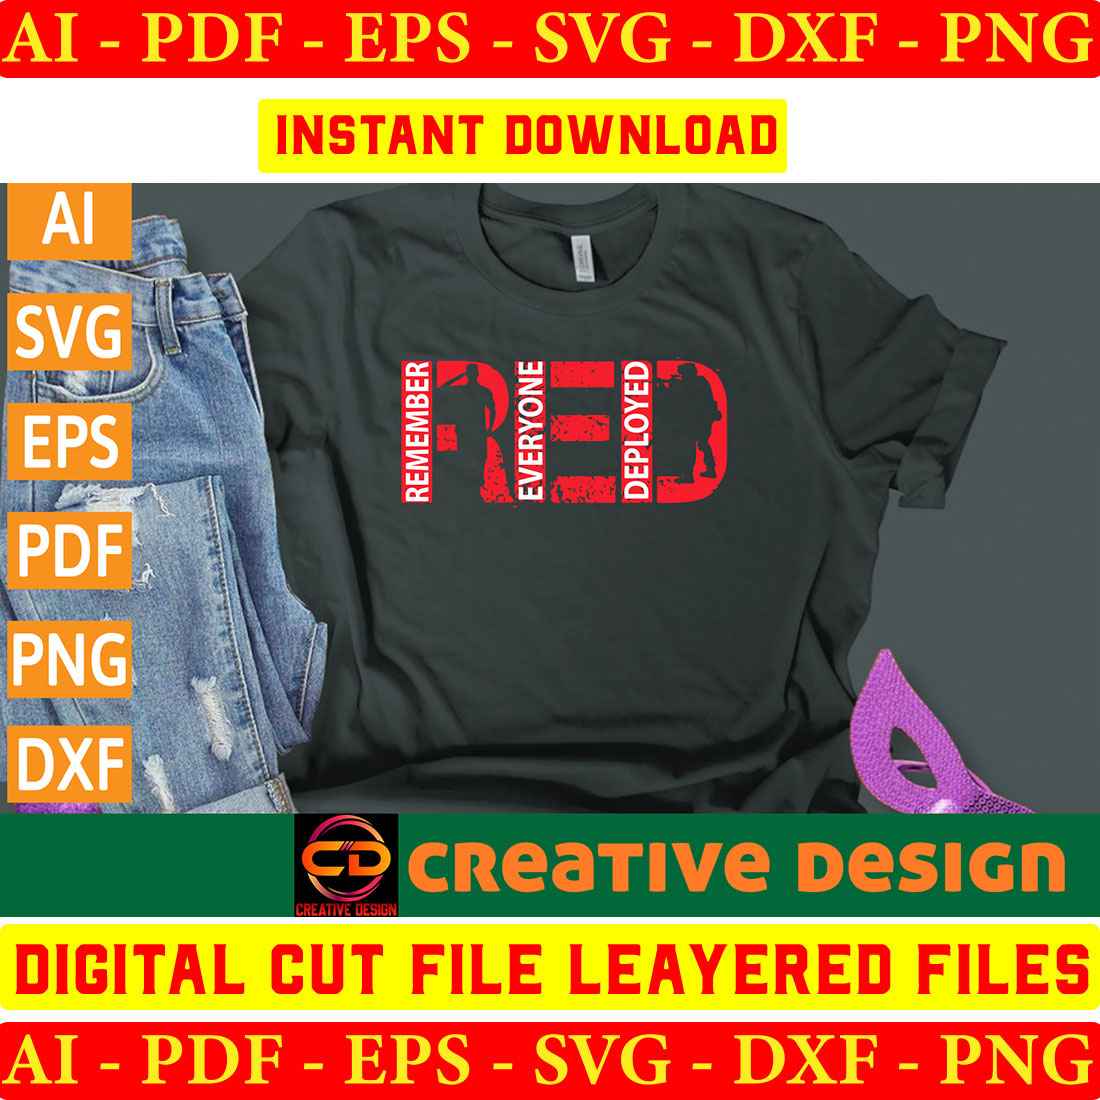 Black t - shirt with a red design on it.